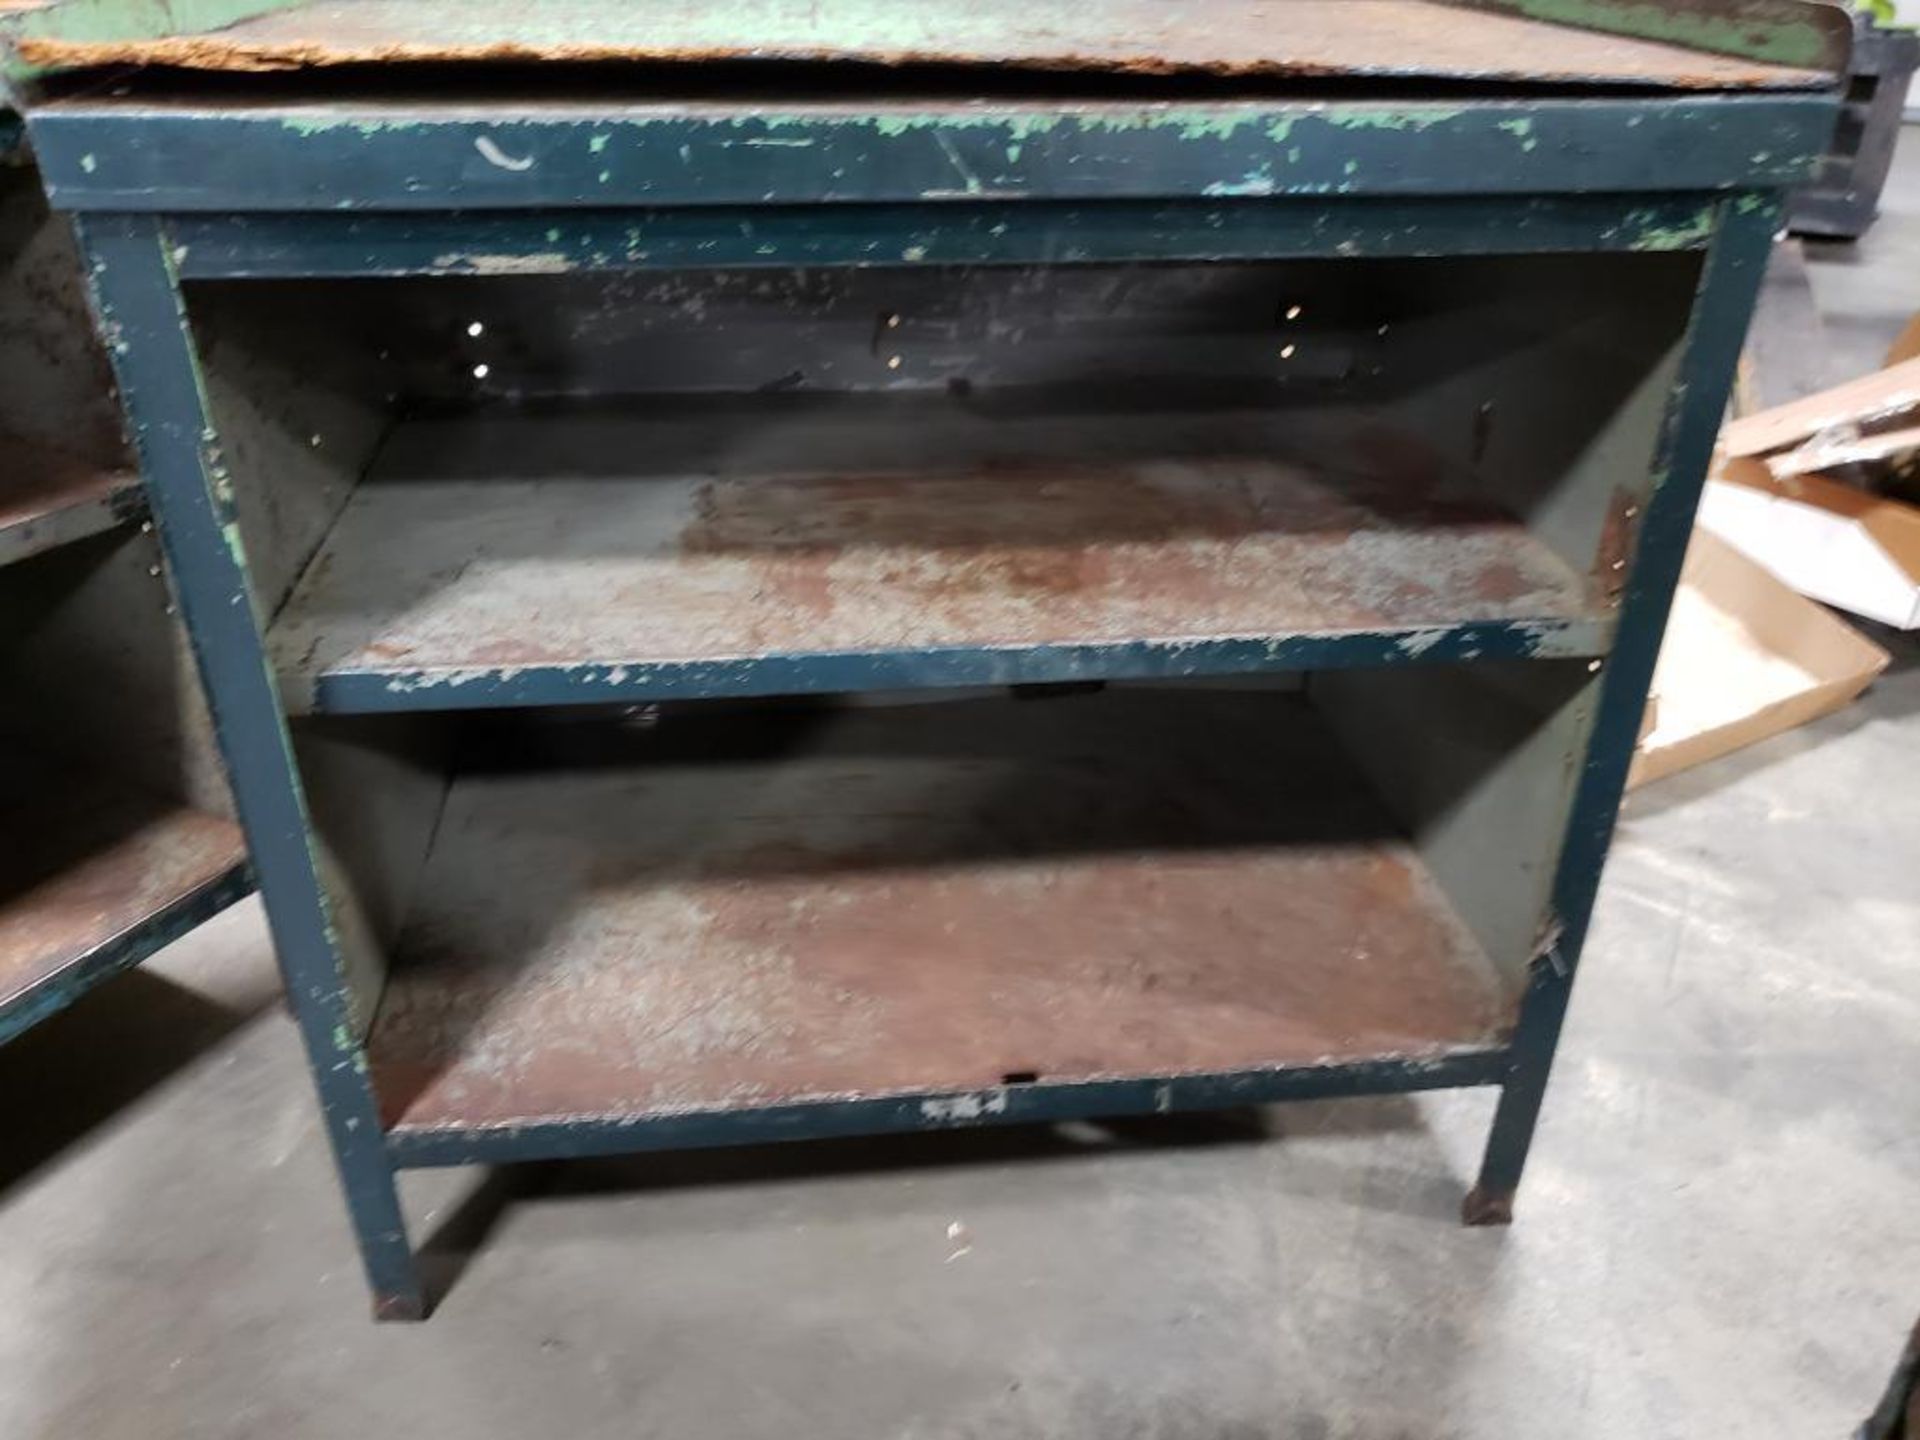 Qty 2 - Industrial work table. 36x24x36 WxDxH. - Image 2 of 6